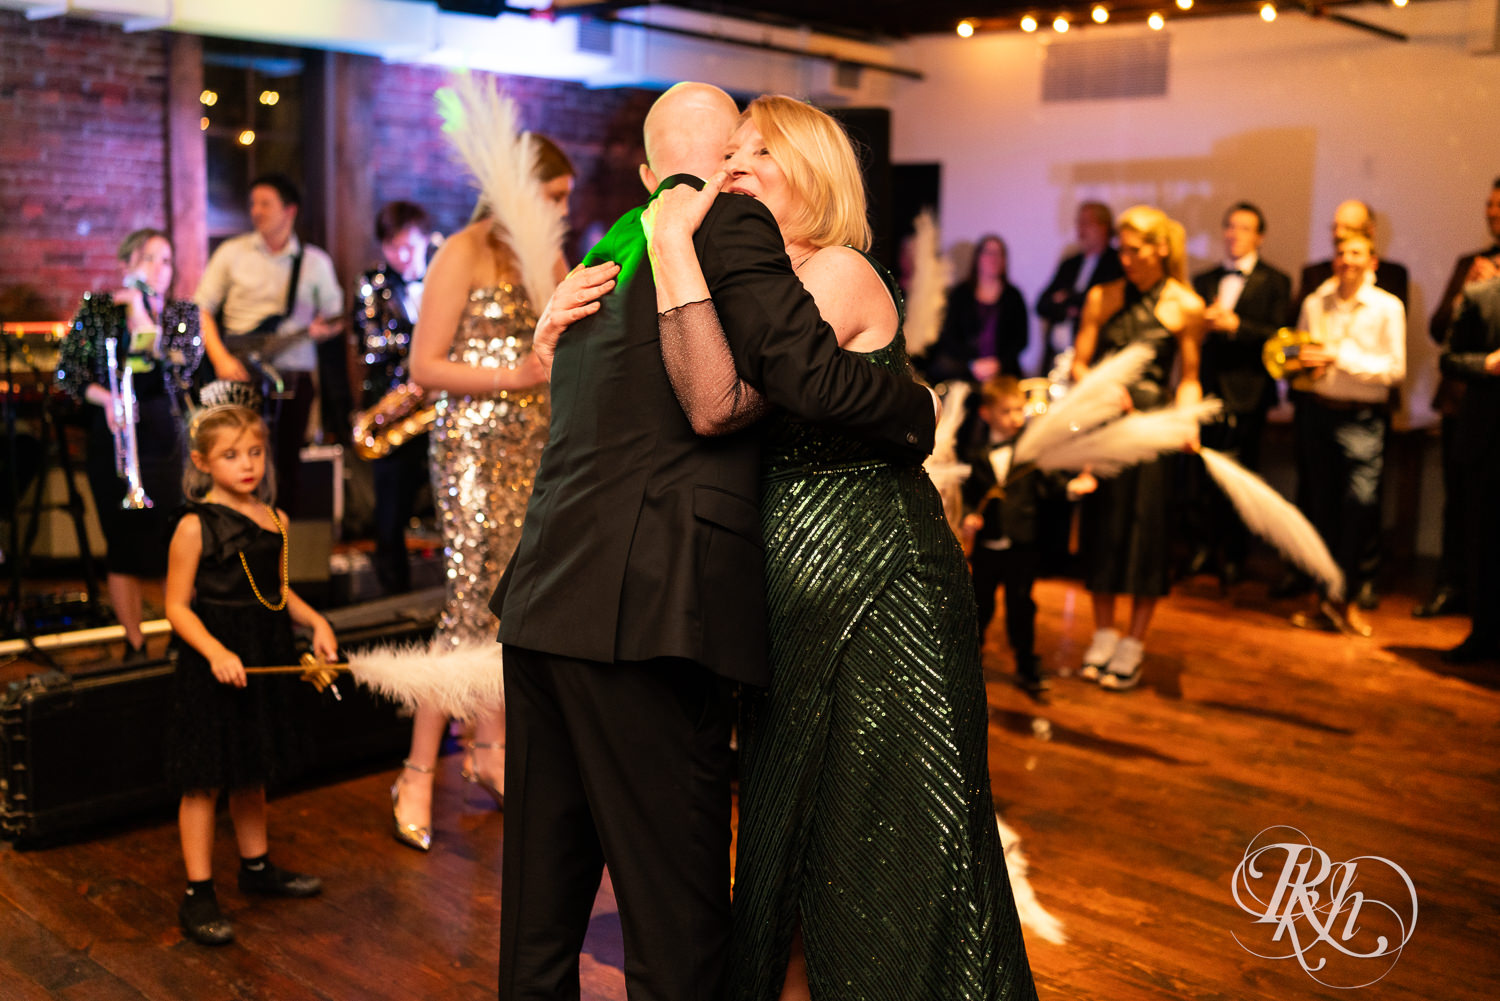 Groom and mom dance during wedding reception at Gatherings at Station 10 in Saint Paul, Minnesota.